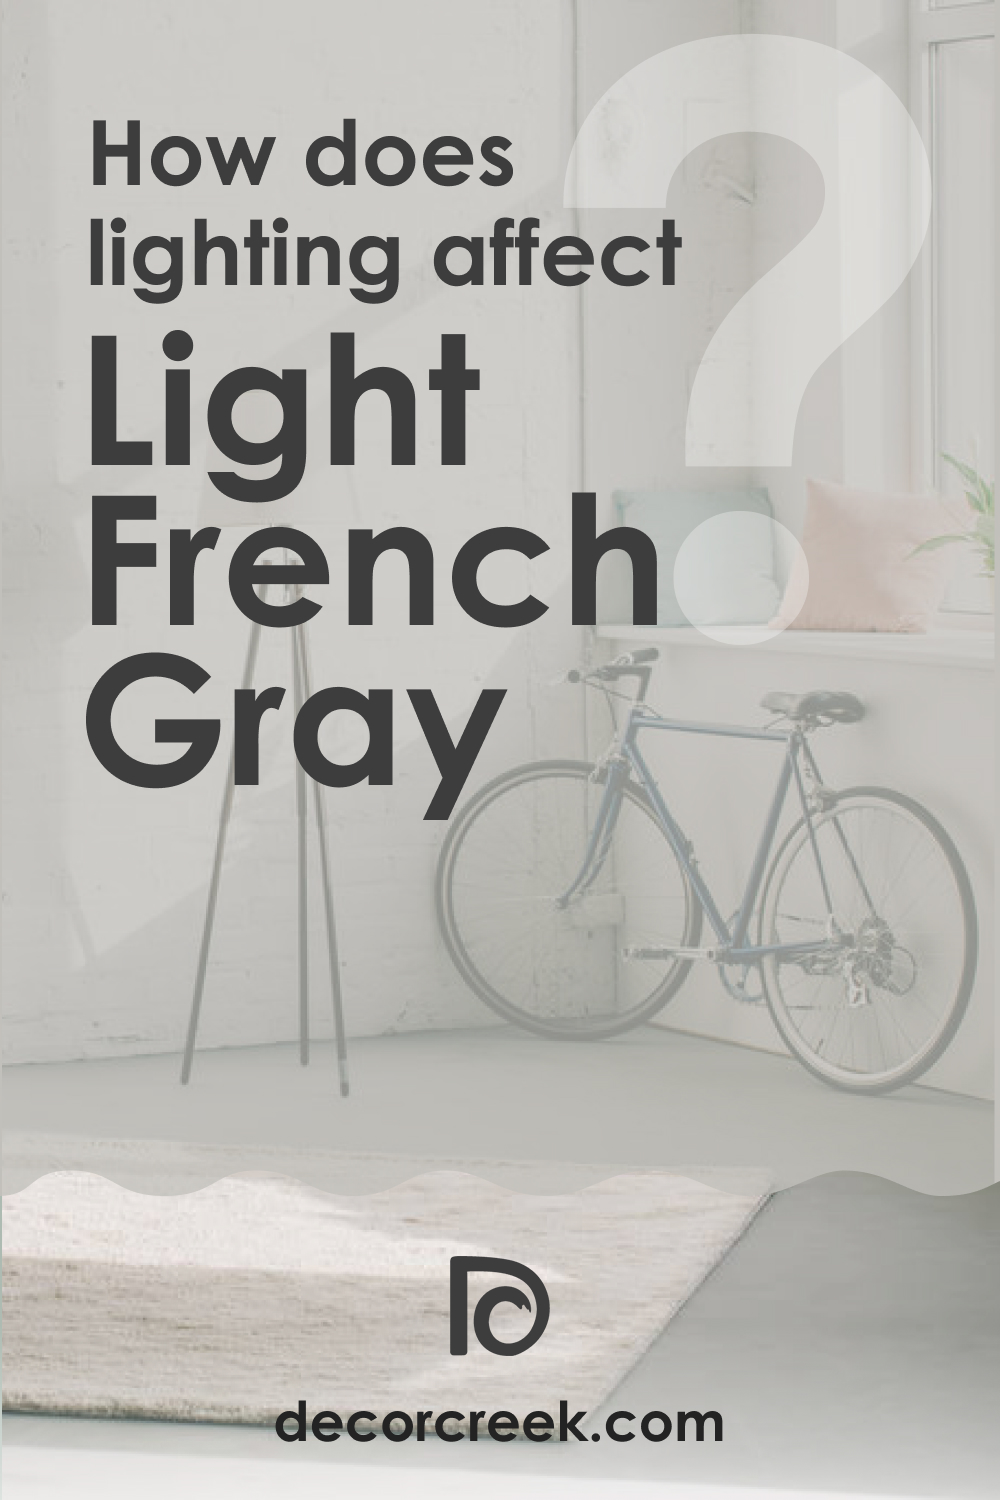 How Does Lighting Affect SW 0055 Light French Gray?